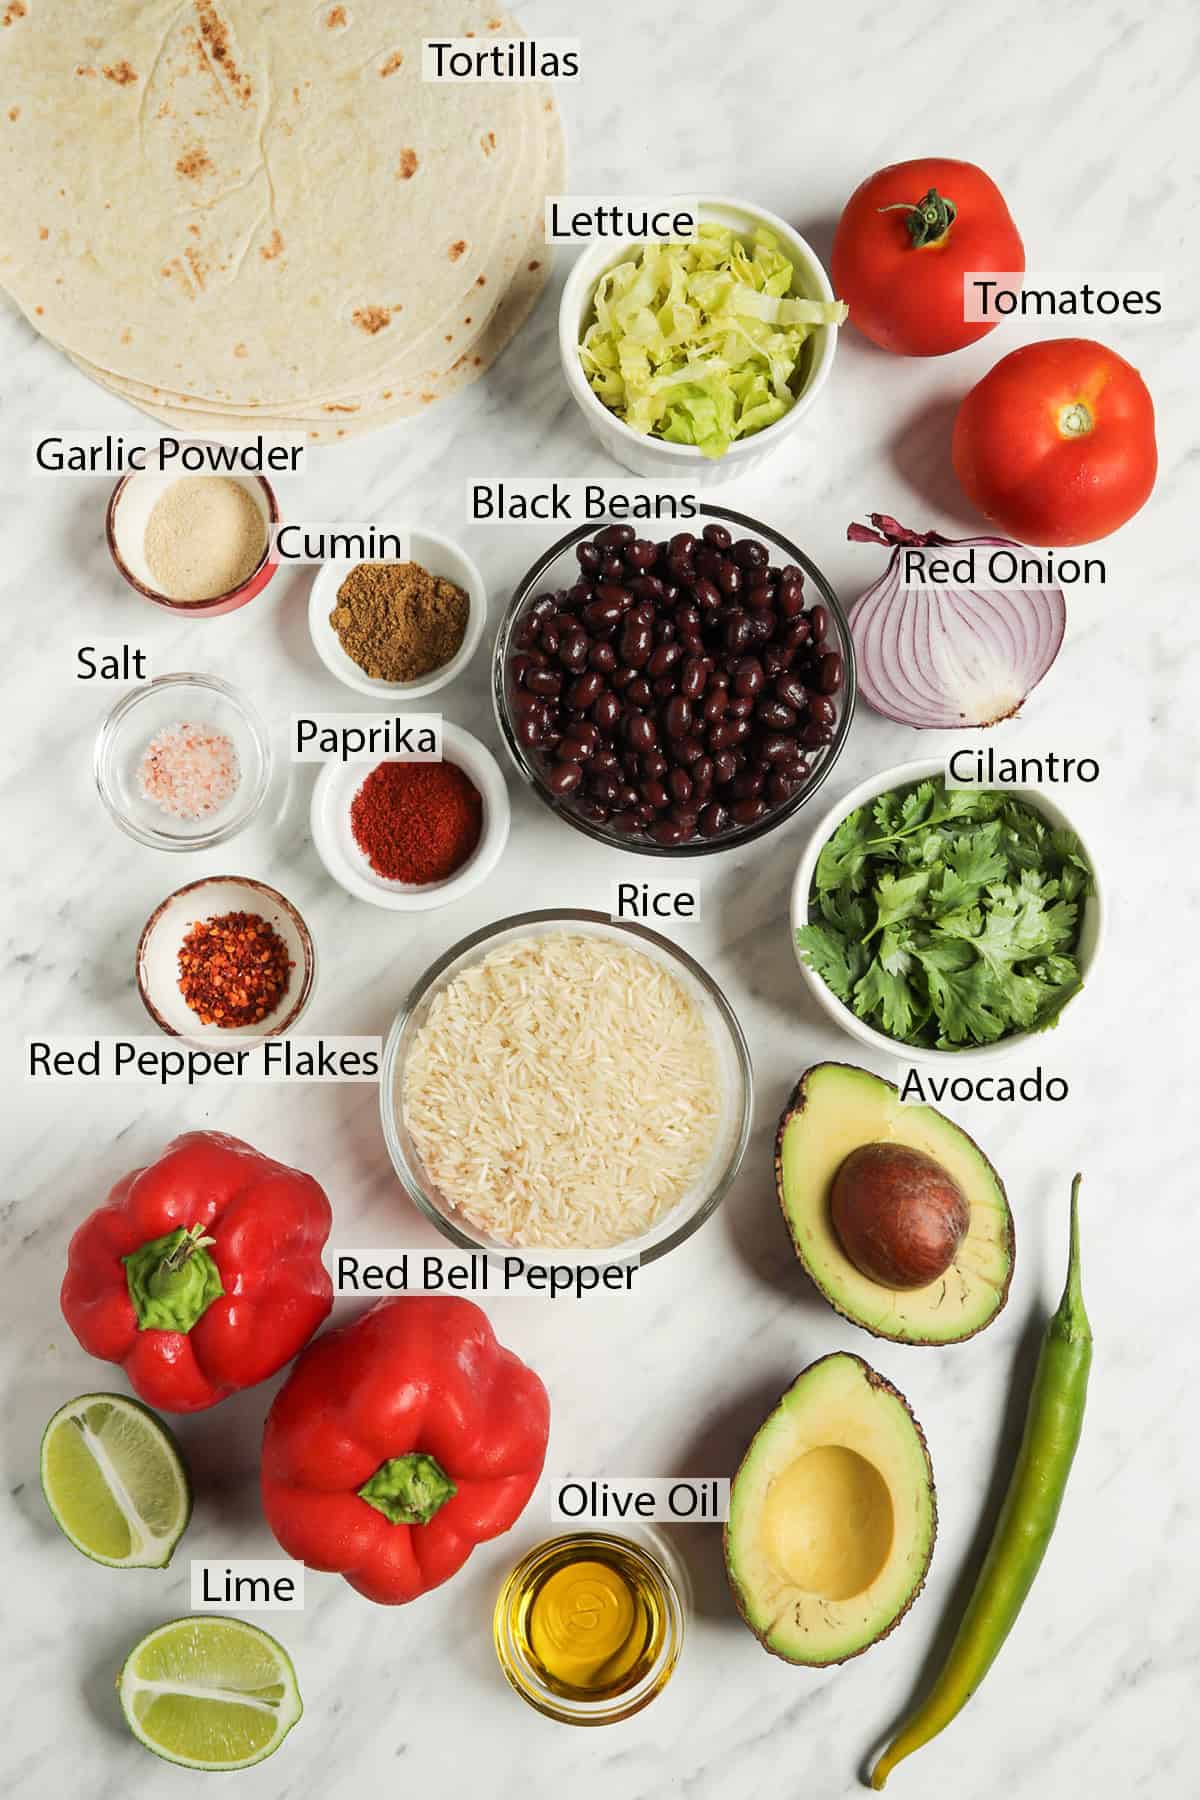 bell peppers, olive oil, avocado, lime, rice, paprika, red pepper flakes, salt, cumin, onion, beans, tomatoes, lettuce, and tortillas